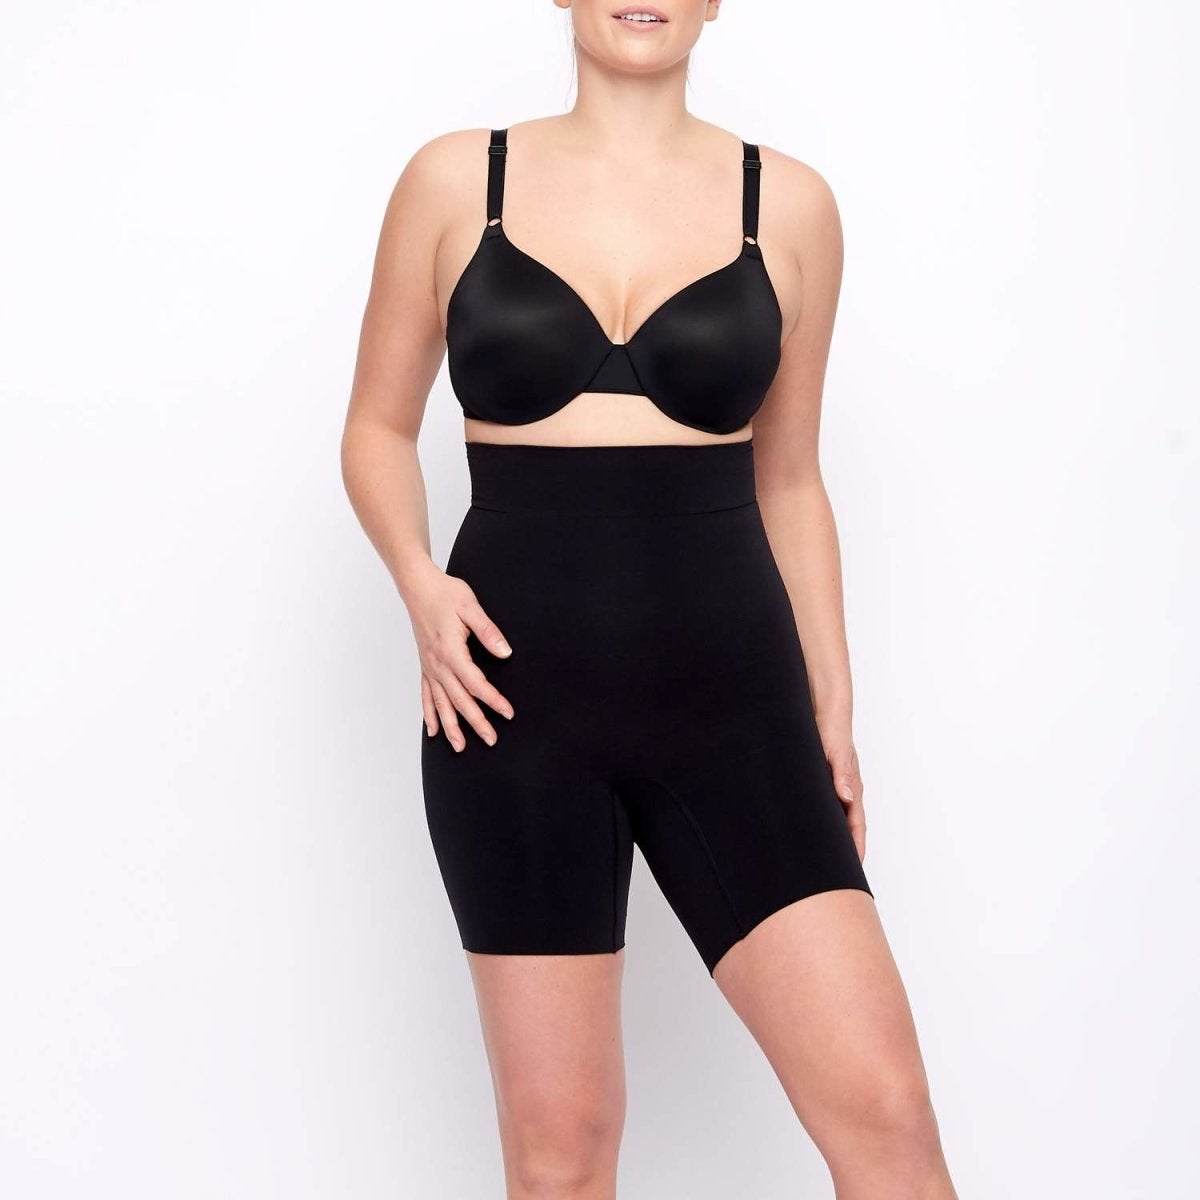 SMOOTH COUTURE SHAPEWEAR COLLECTION